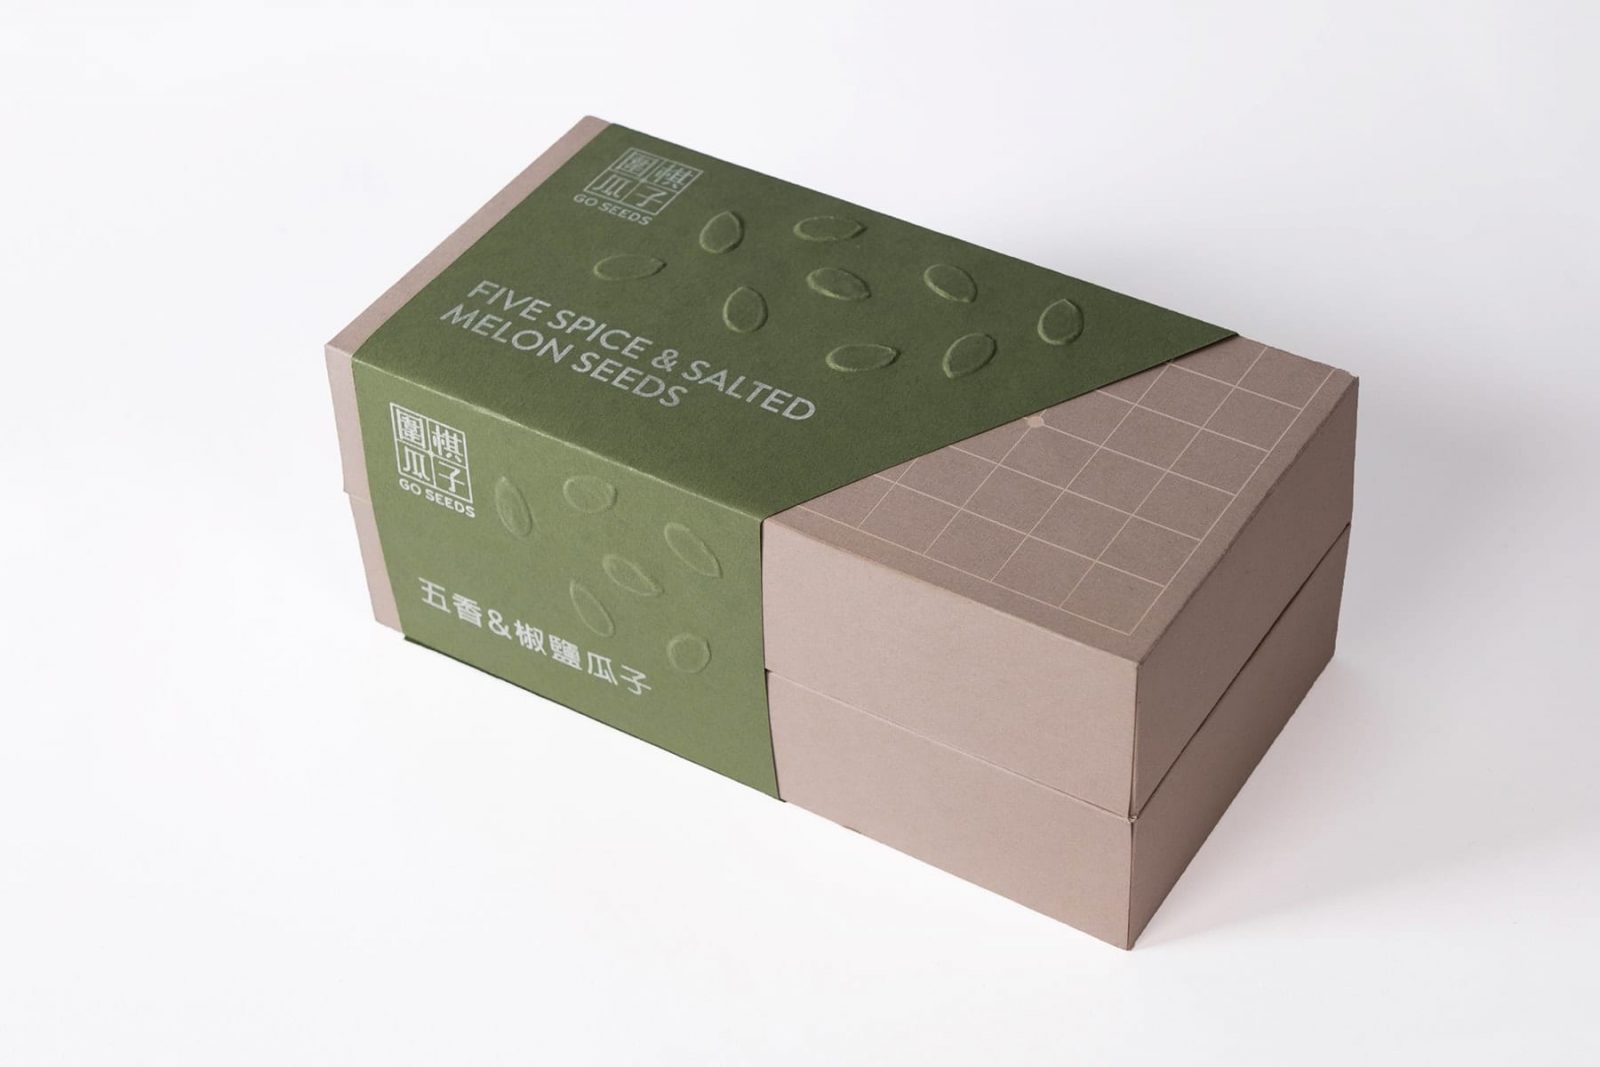 Bilingual Packaging Design for Melon Seeds and “Go” Board Game